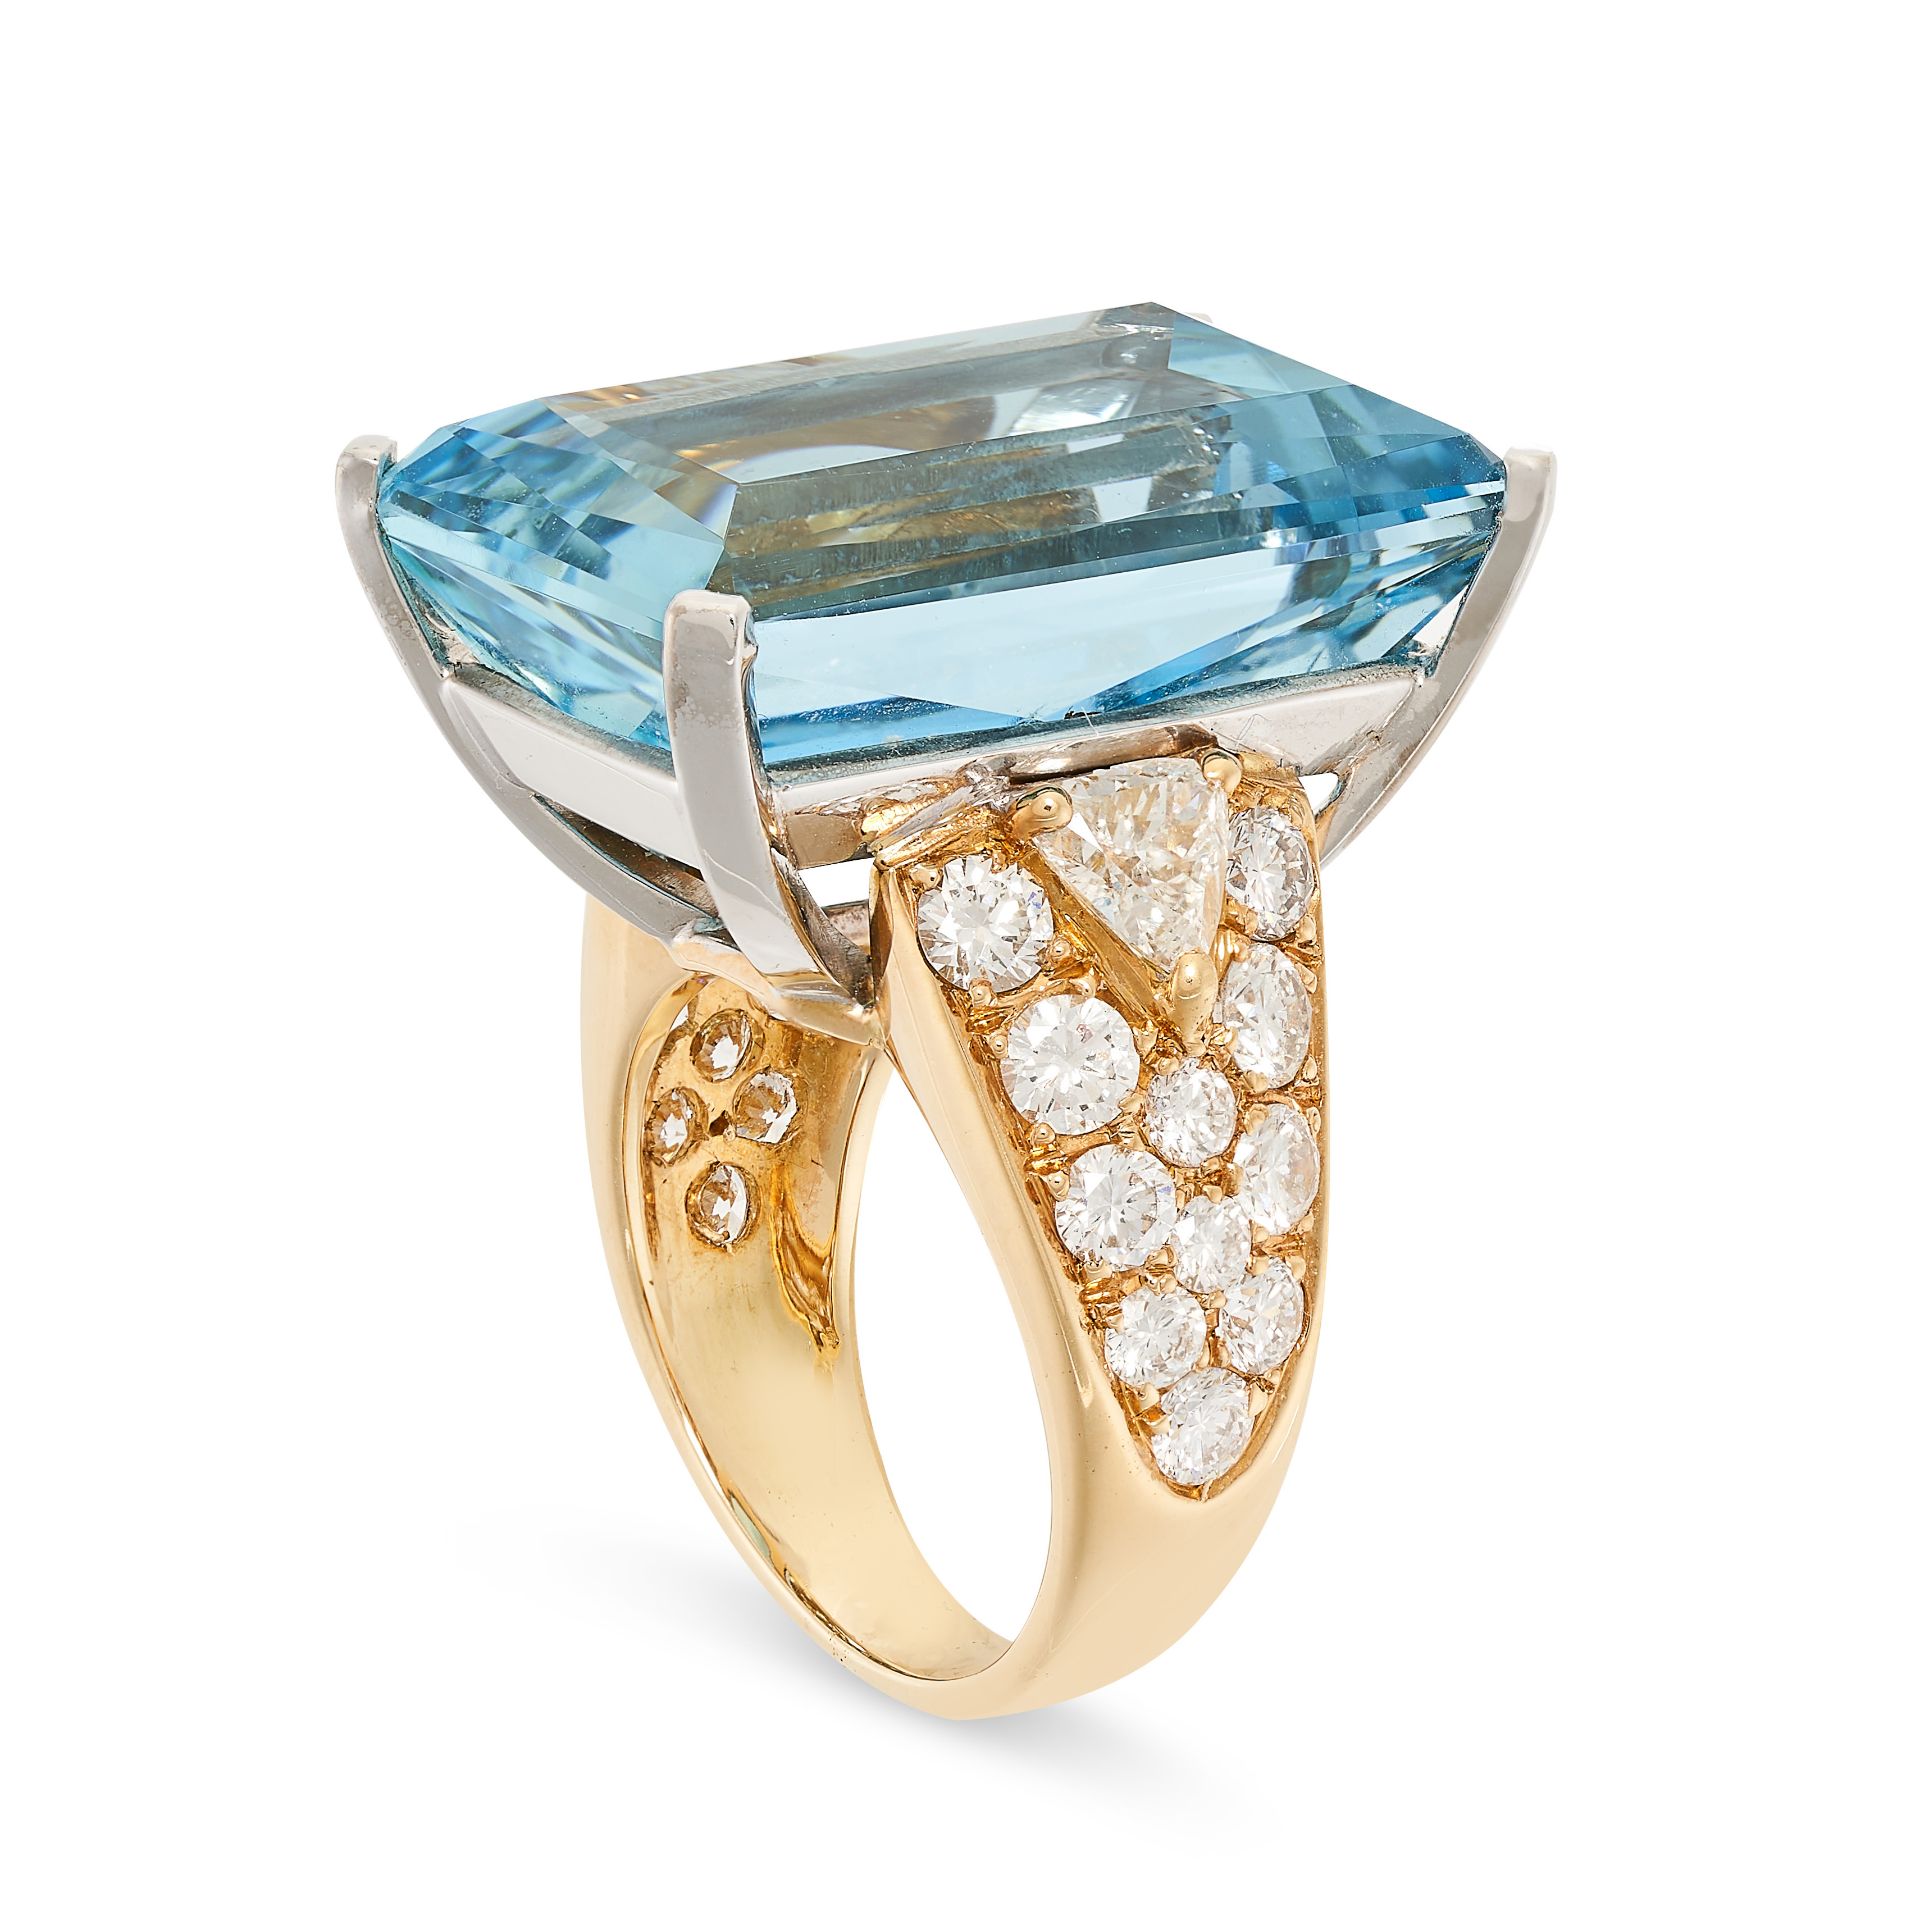 REPOSSI, A VINTAGE AQUAMARINE AND DIAMOND RING in 18ct yellow and white gold, set with a rectangular - Image 2 of 3